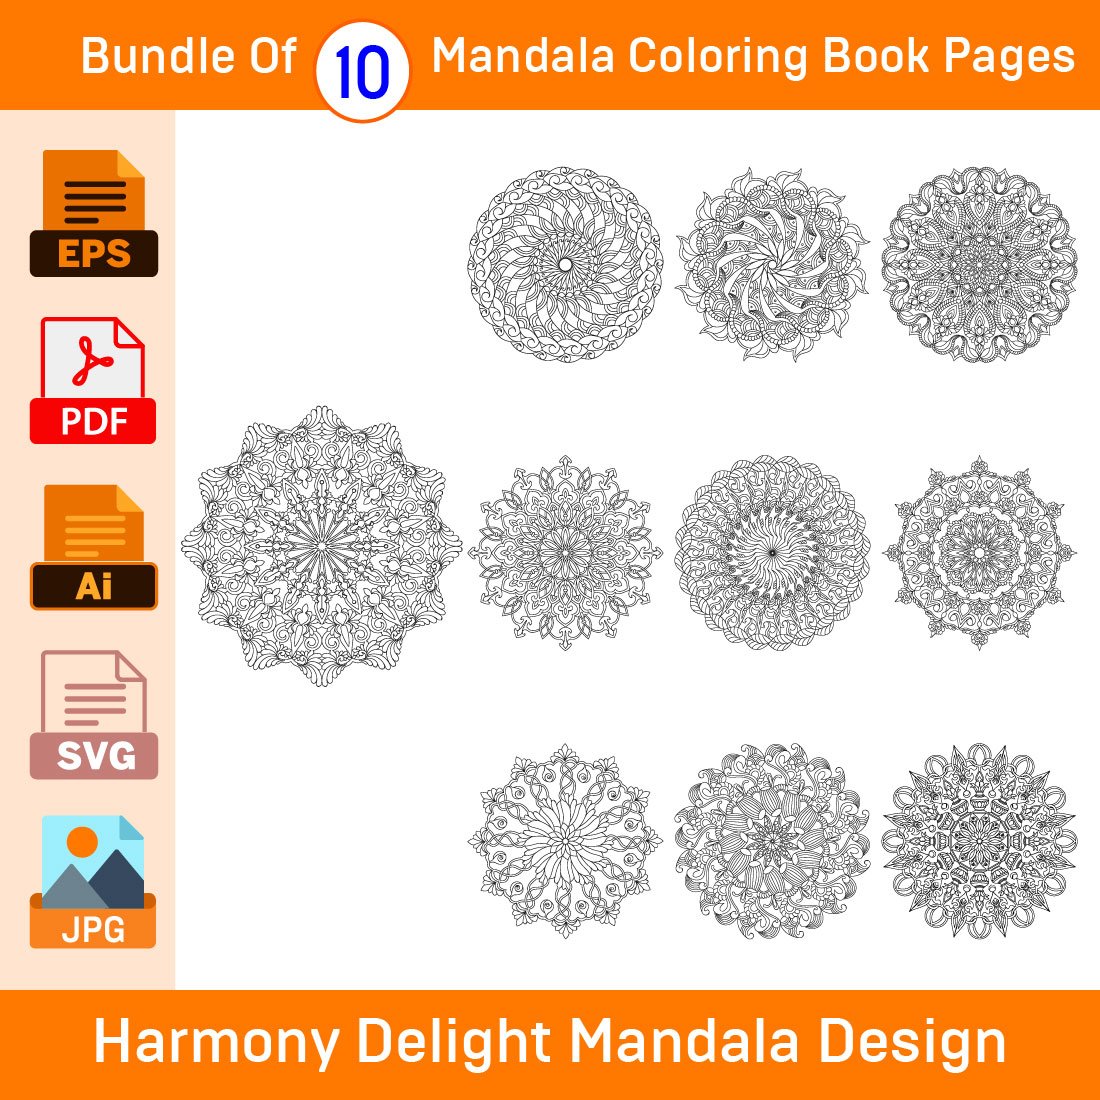 Bundle of 10 Harmony Delight Mandala Coloring Book Pages cover image.